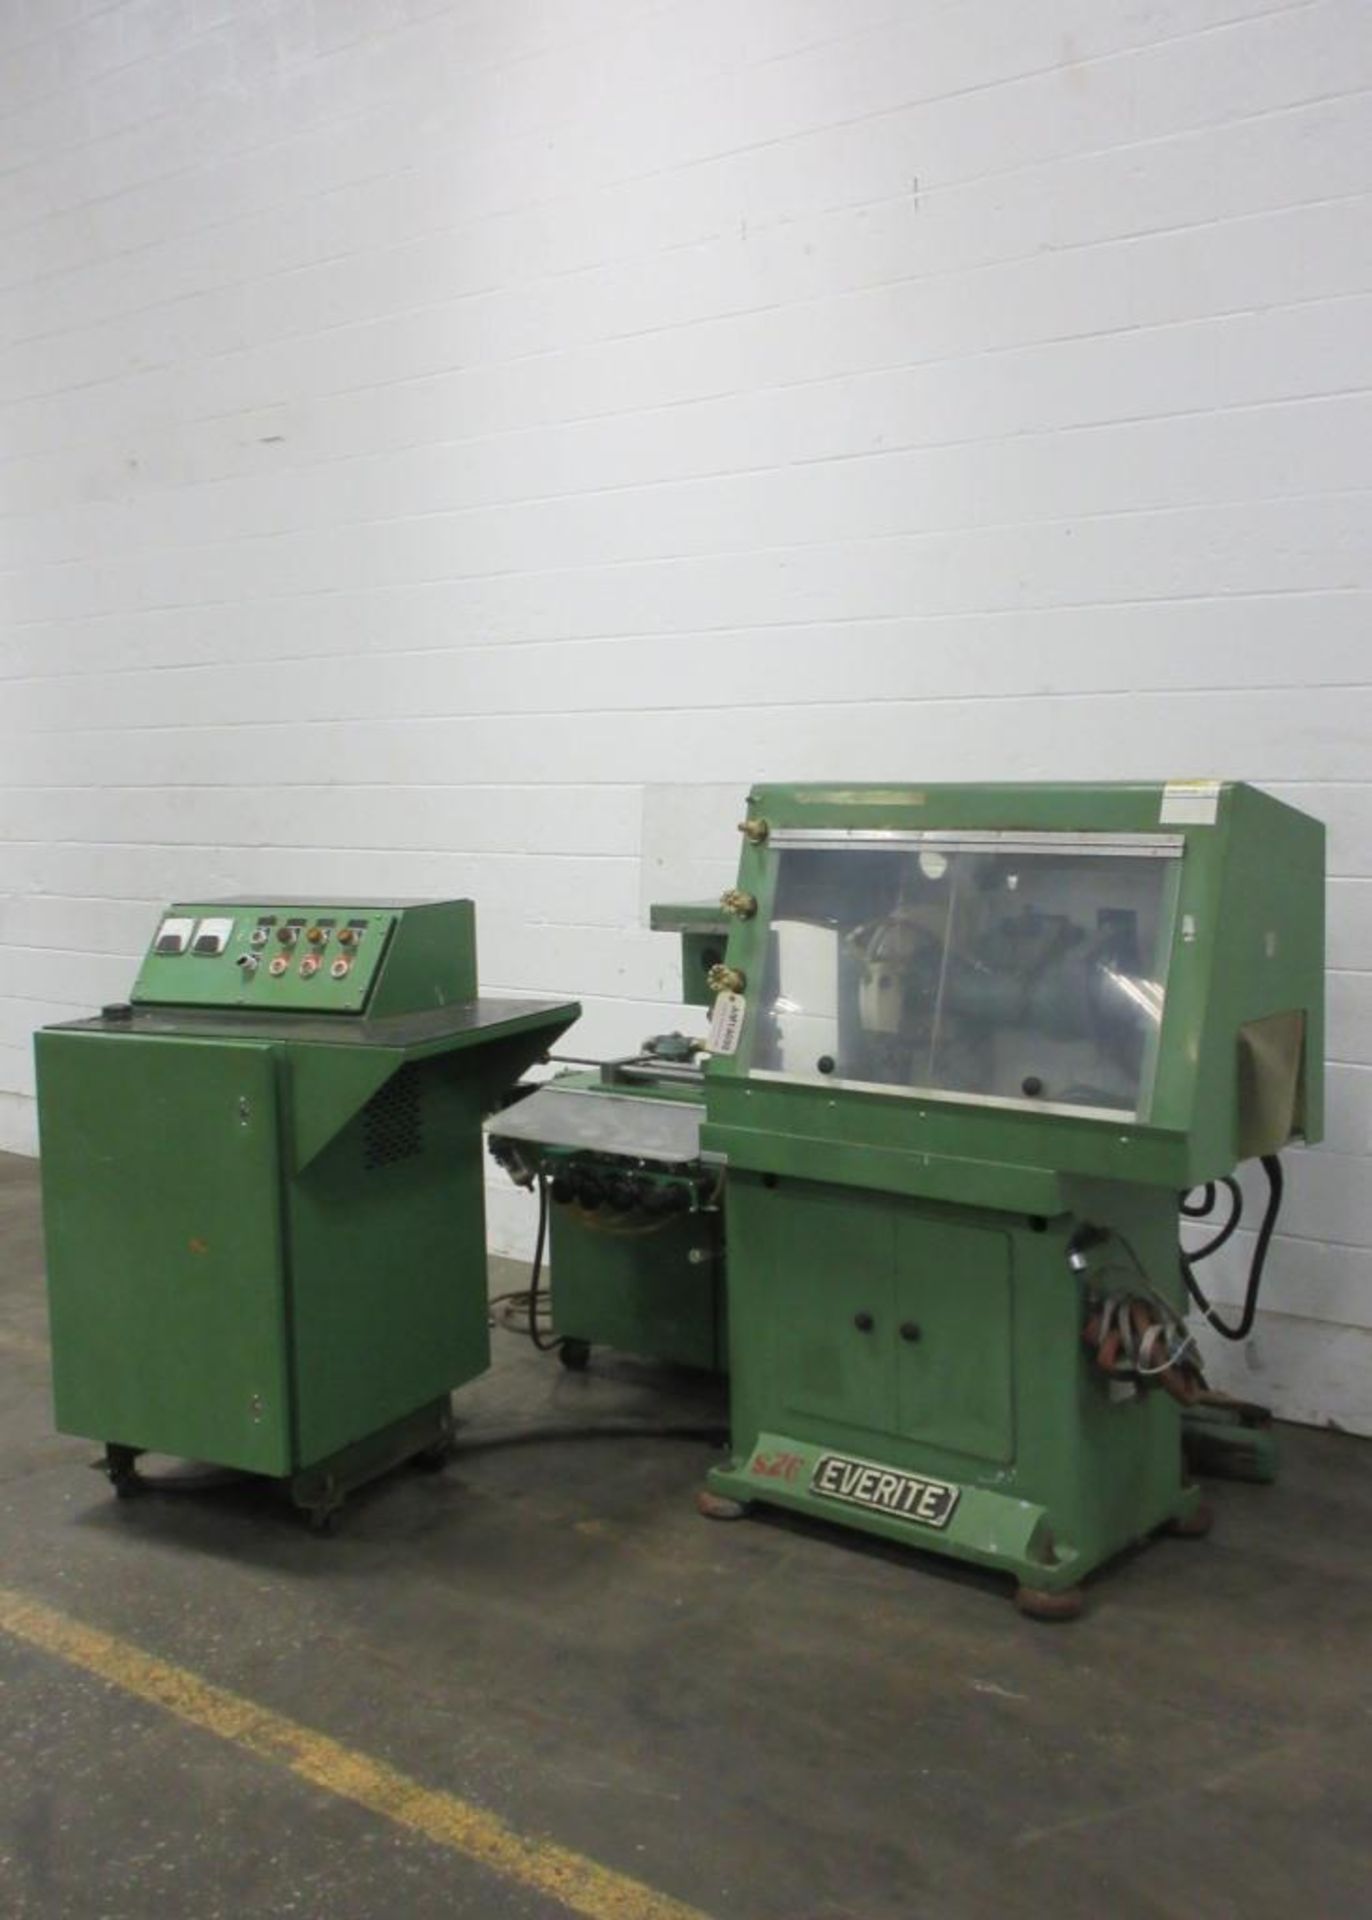 Everite Electrolytic Saw.